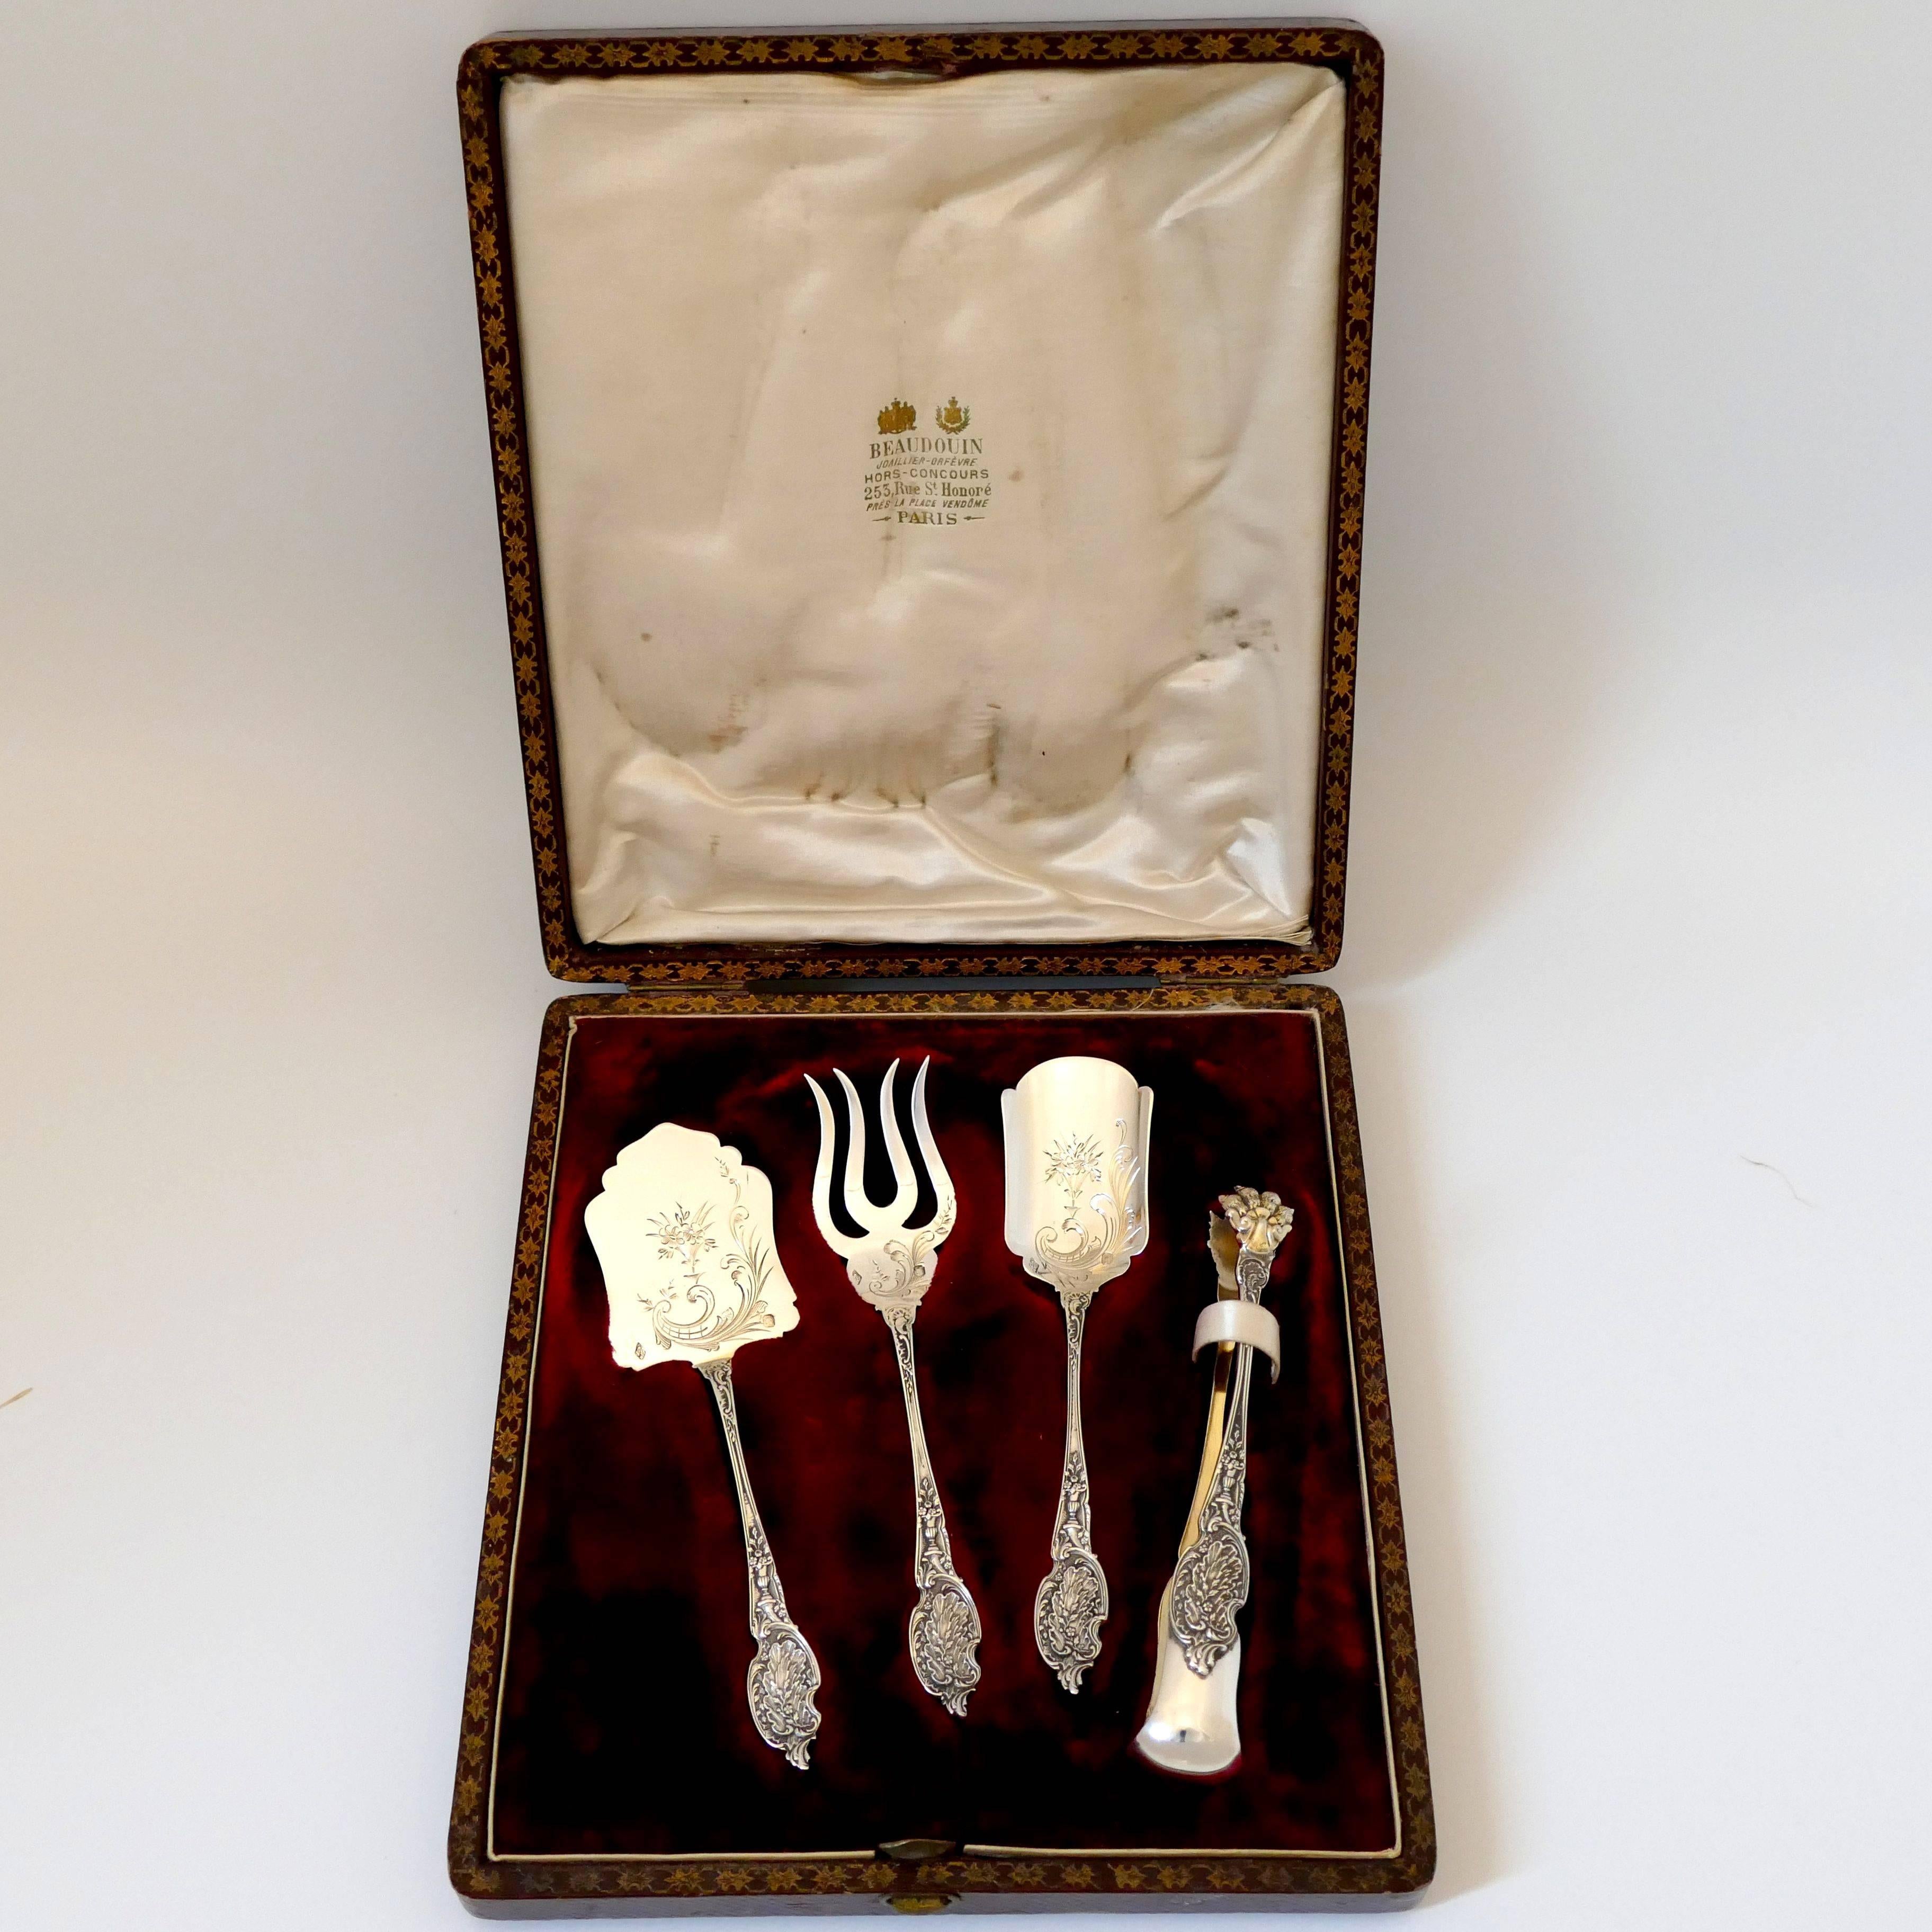 Boivin French Sterling Silver Dessert Hors D'oeuvre Set Four Pieces Original Box For Sale 2